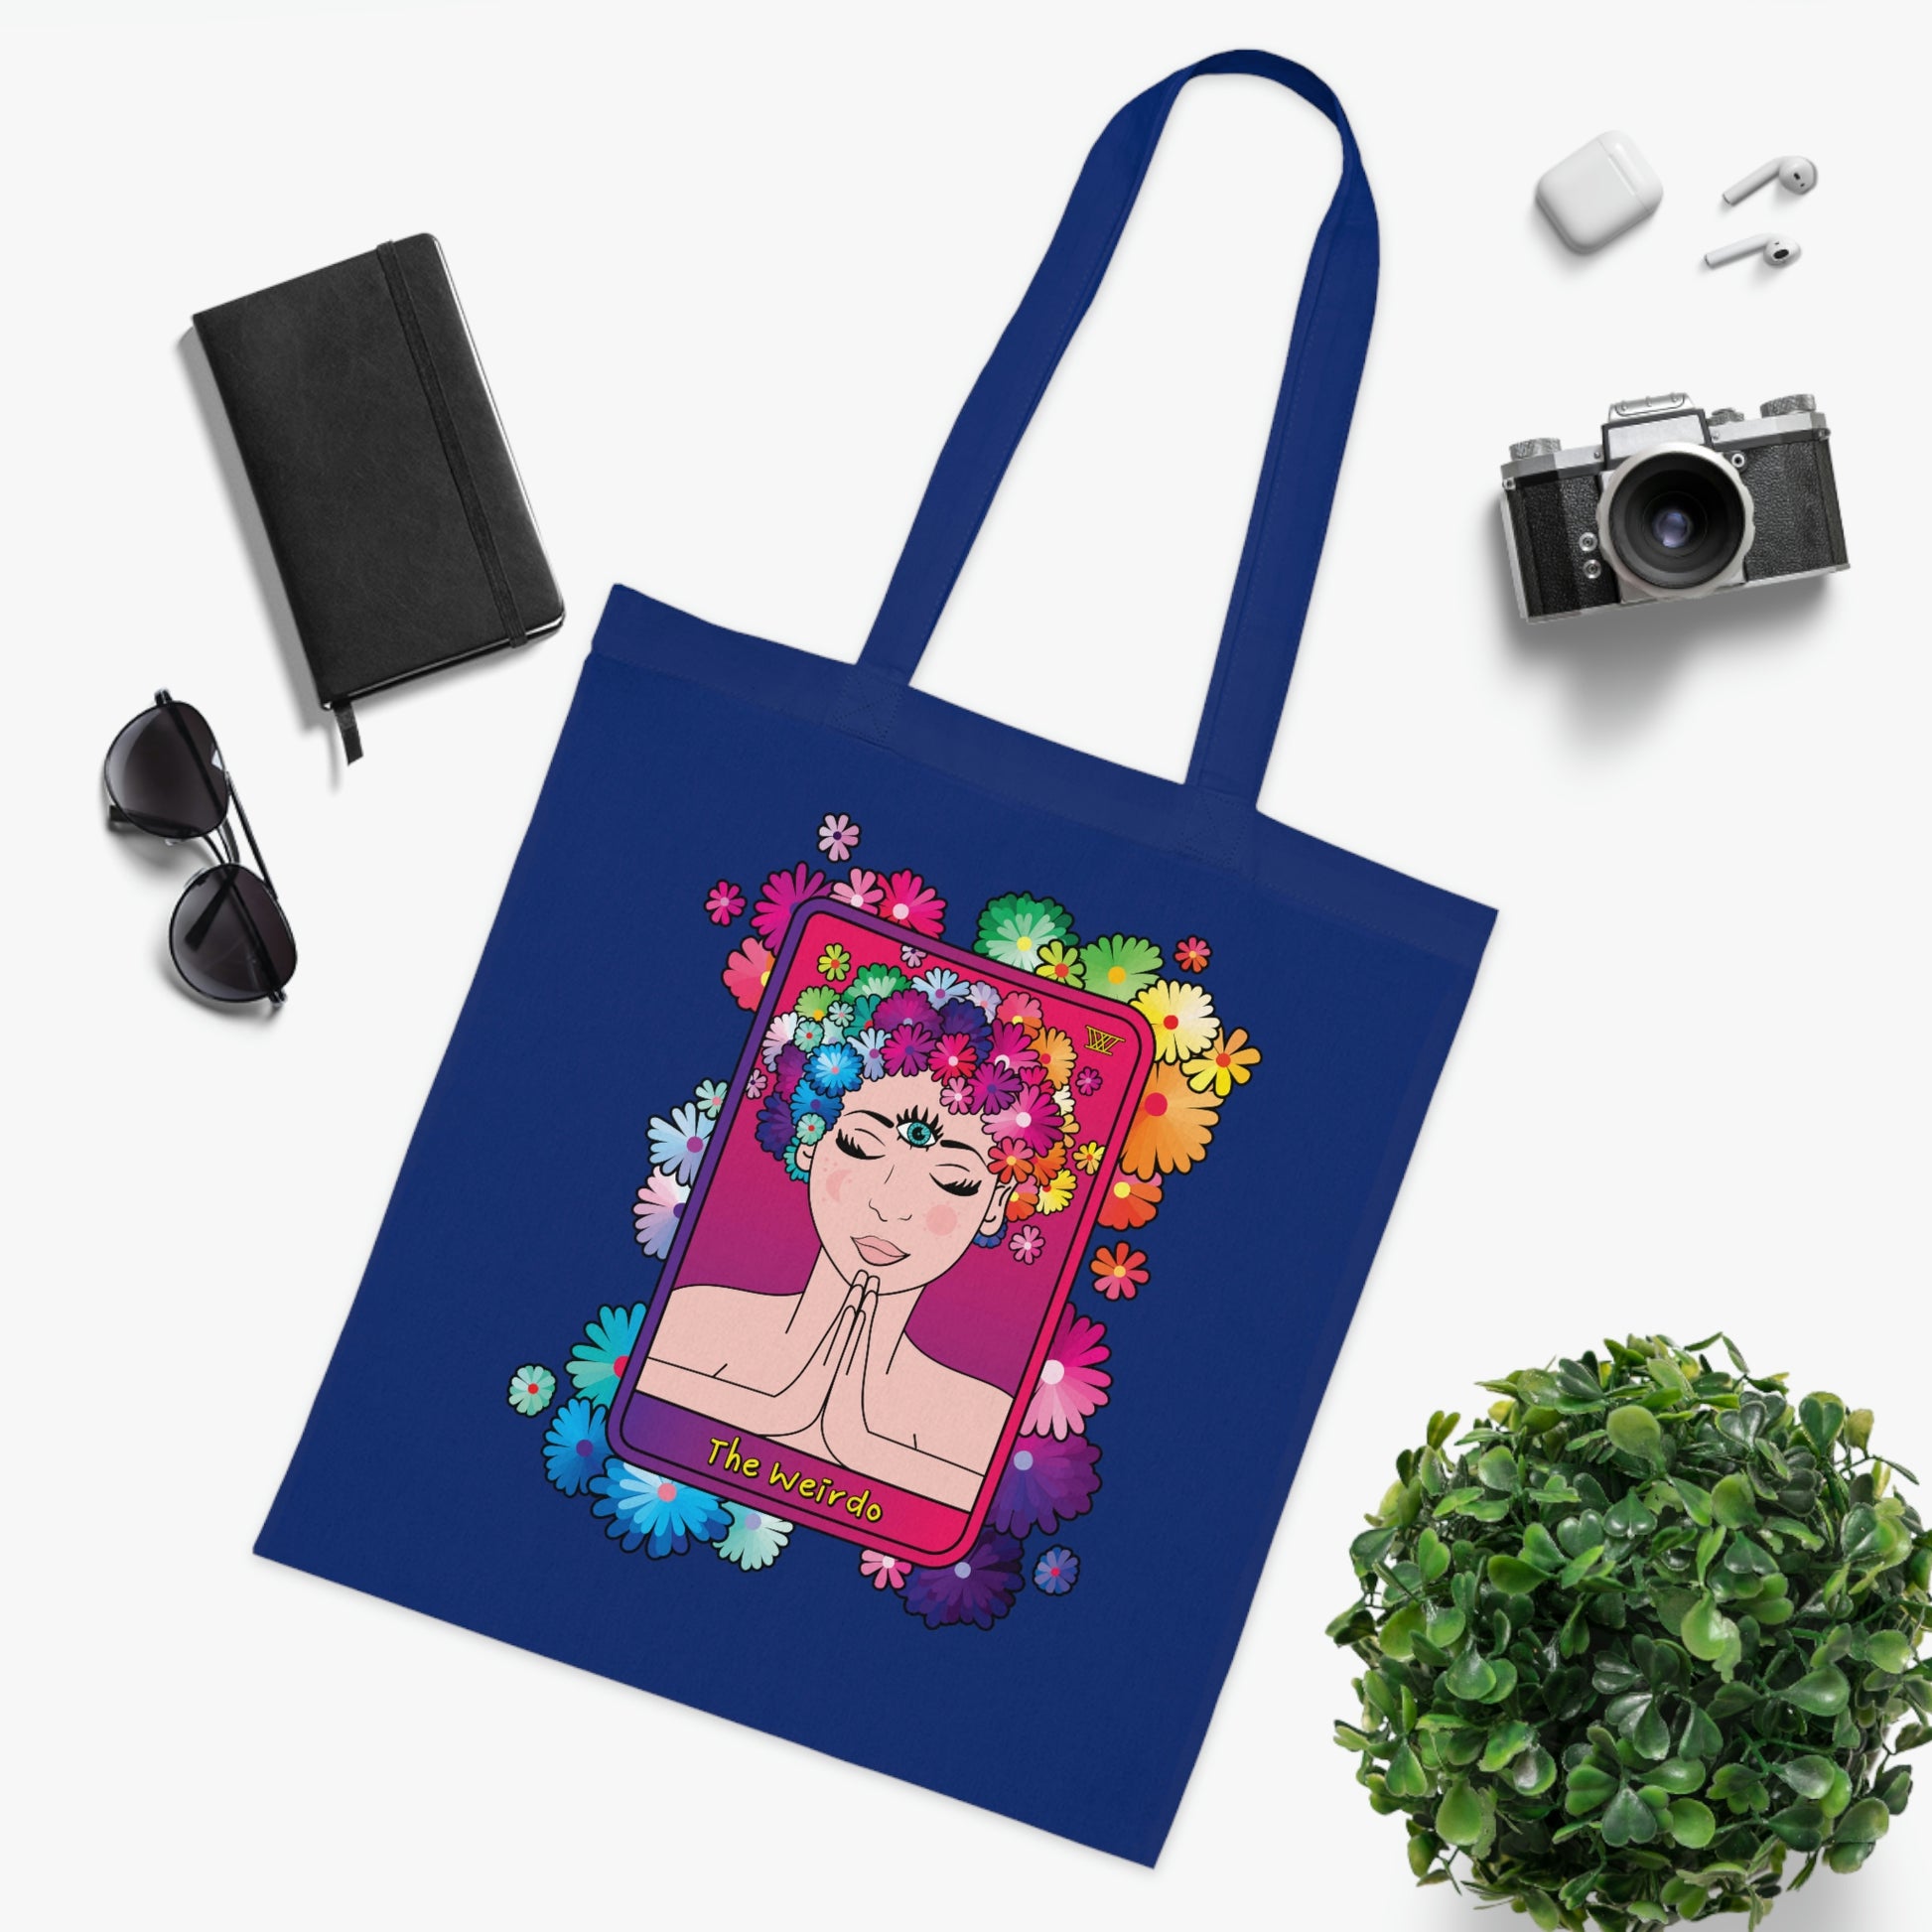  Weirdo | spiritual tote bag for your everyday groceries. This cotton tote bag is blue and has the Weirdo tarot card displayed at the front of the bag.